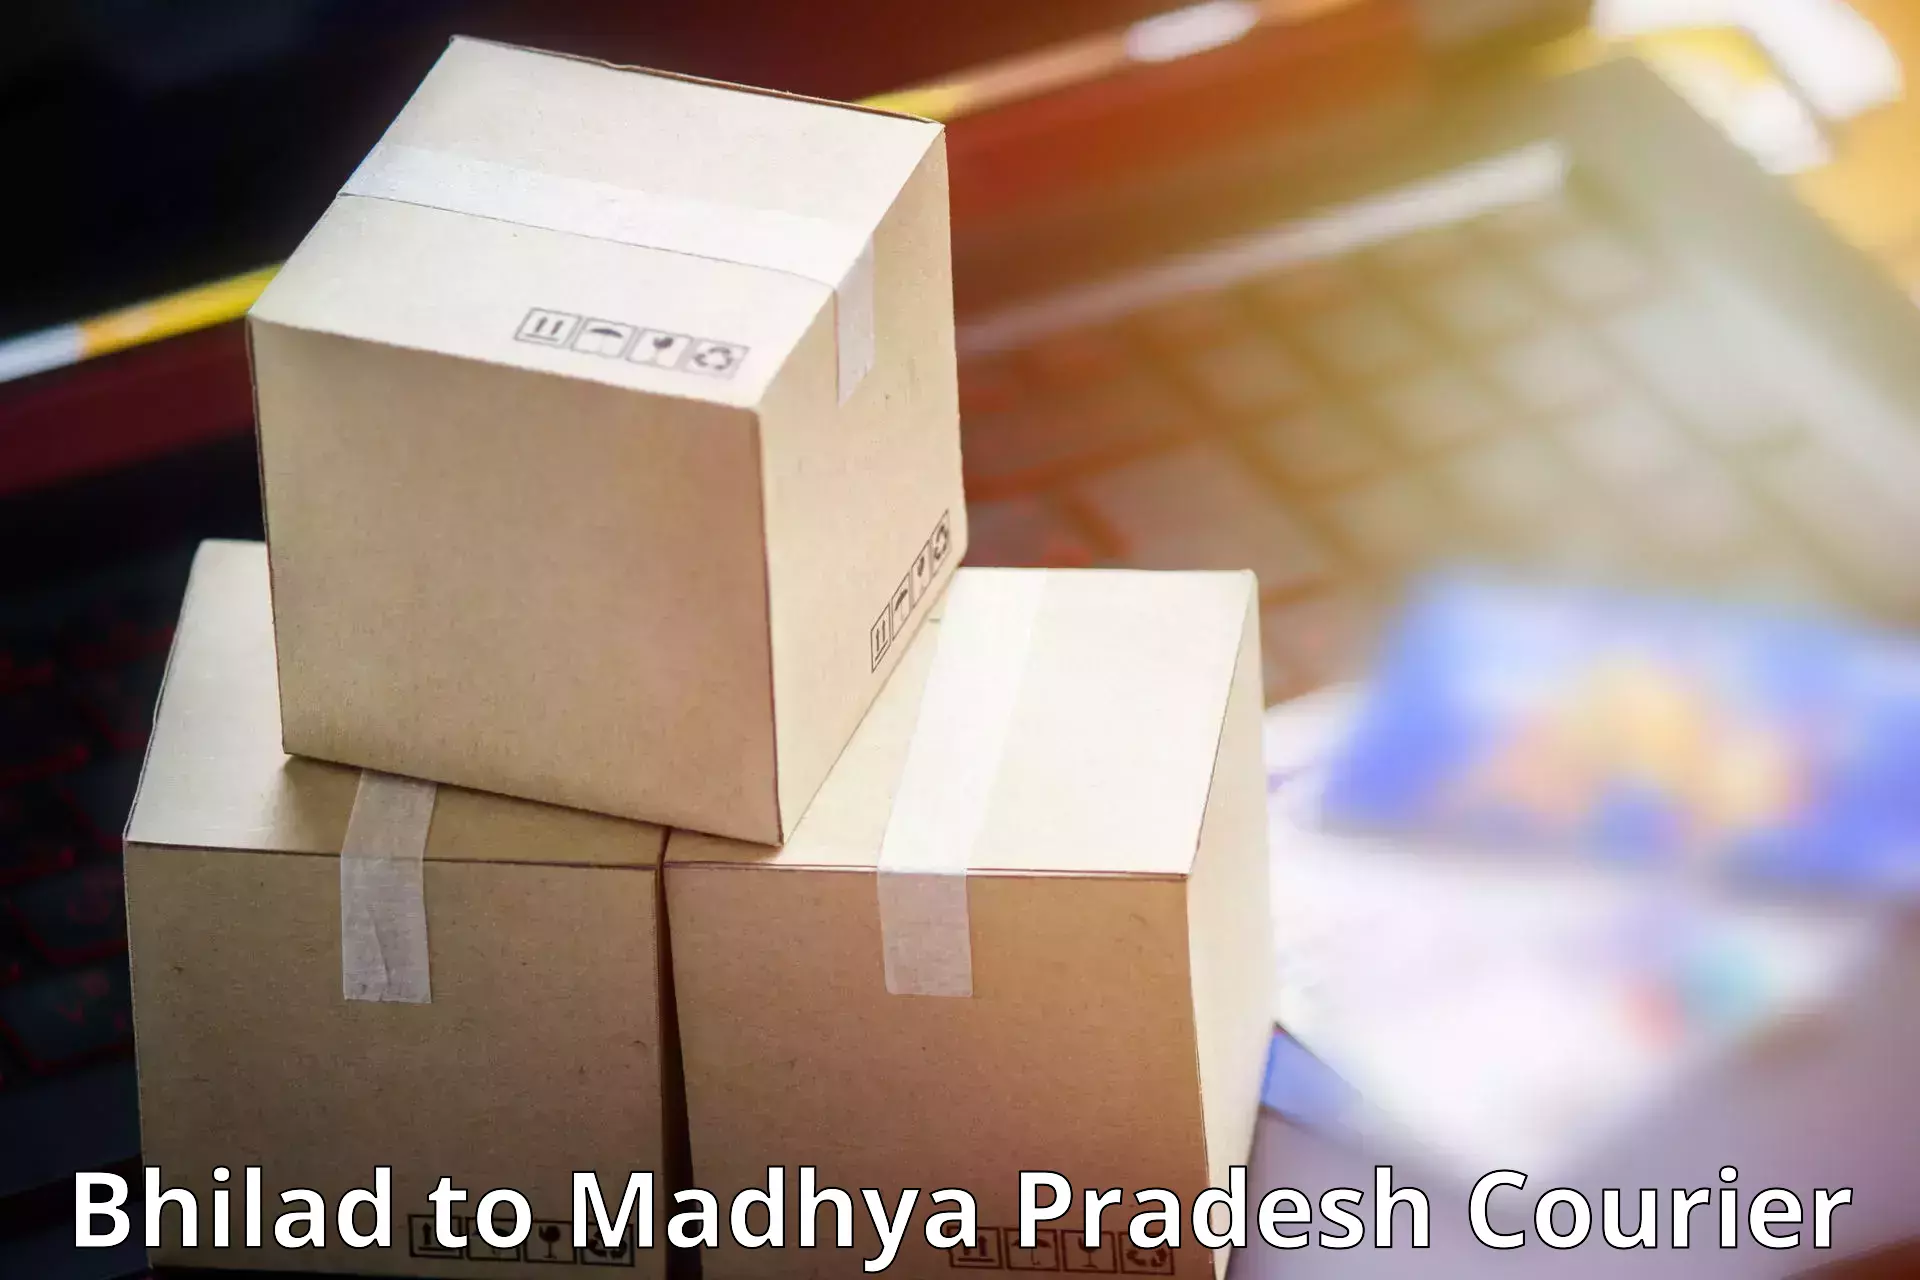 On-call courier service Bhilad to Rahatgarh